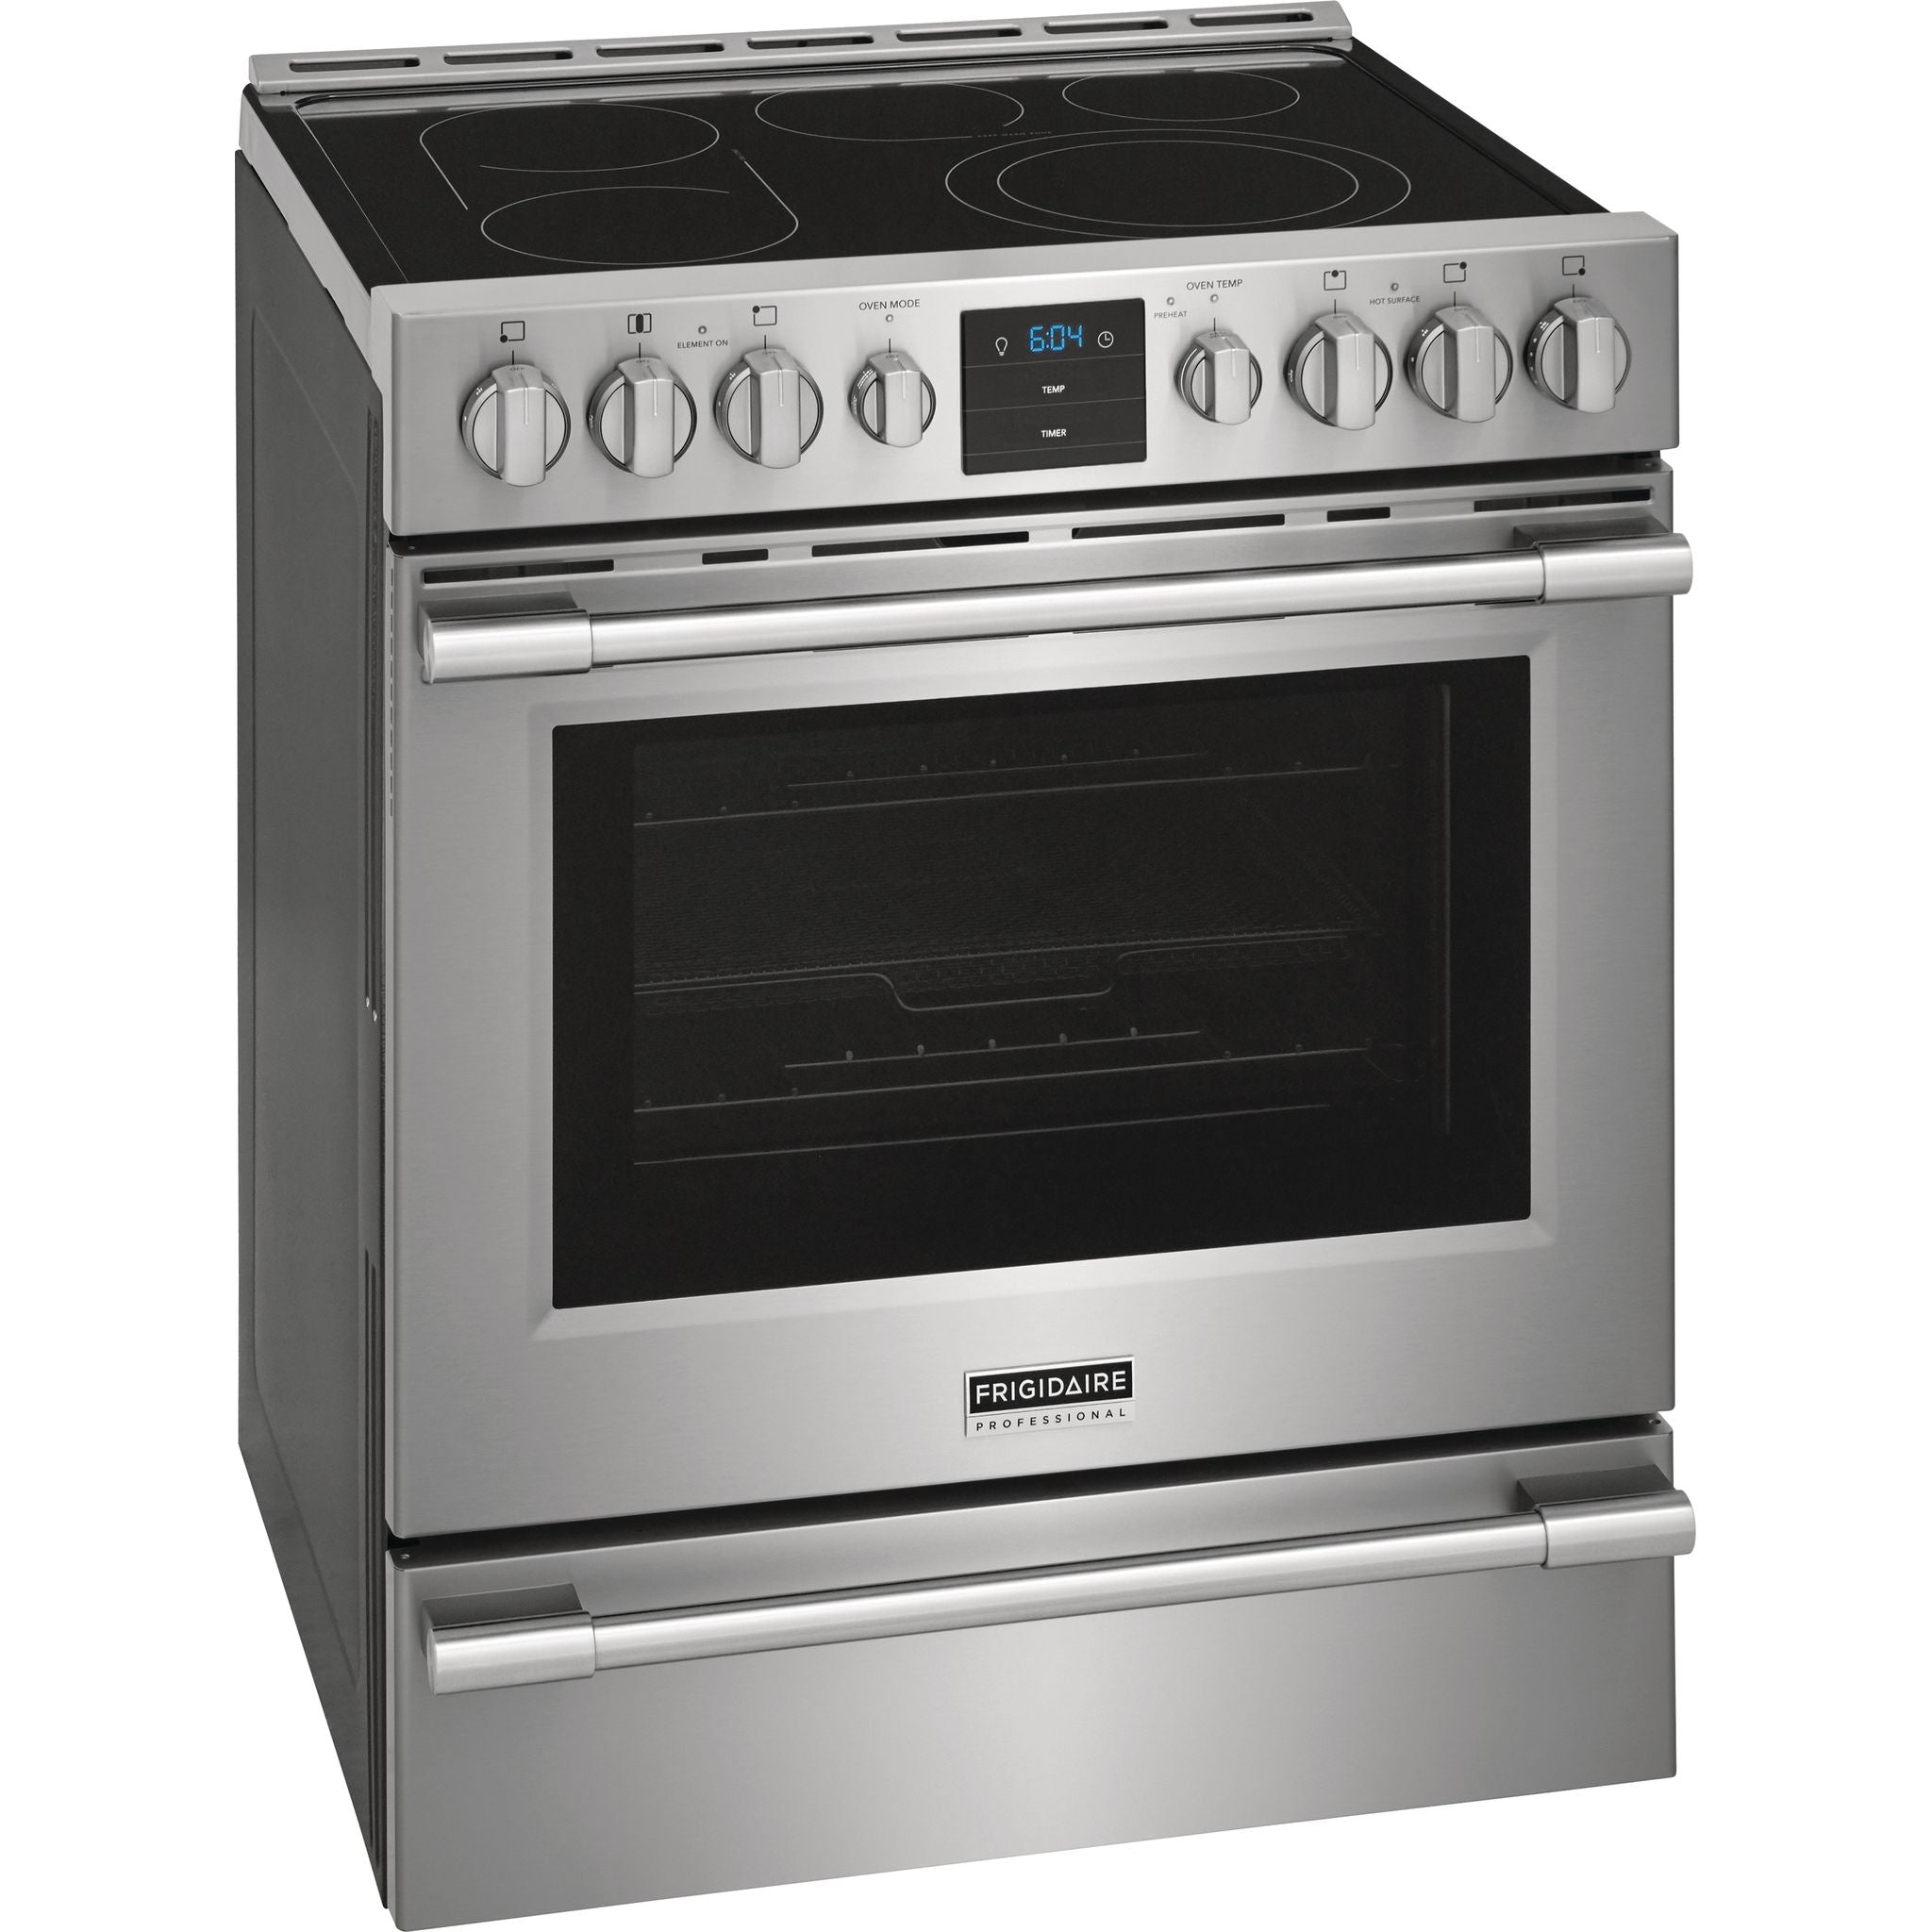 Frigidaire Professional, Frigidaire Professional 30" Electric Range (PCFE307CAF) - Stainless Steel